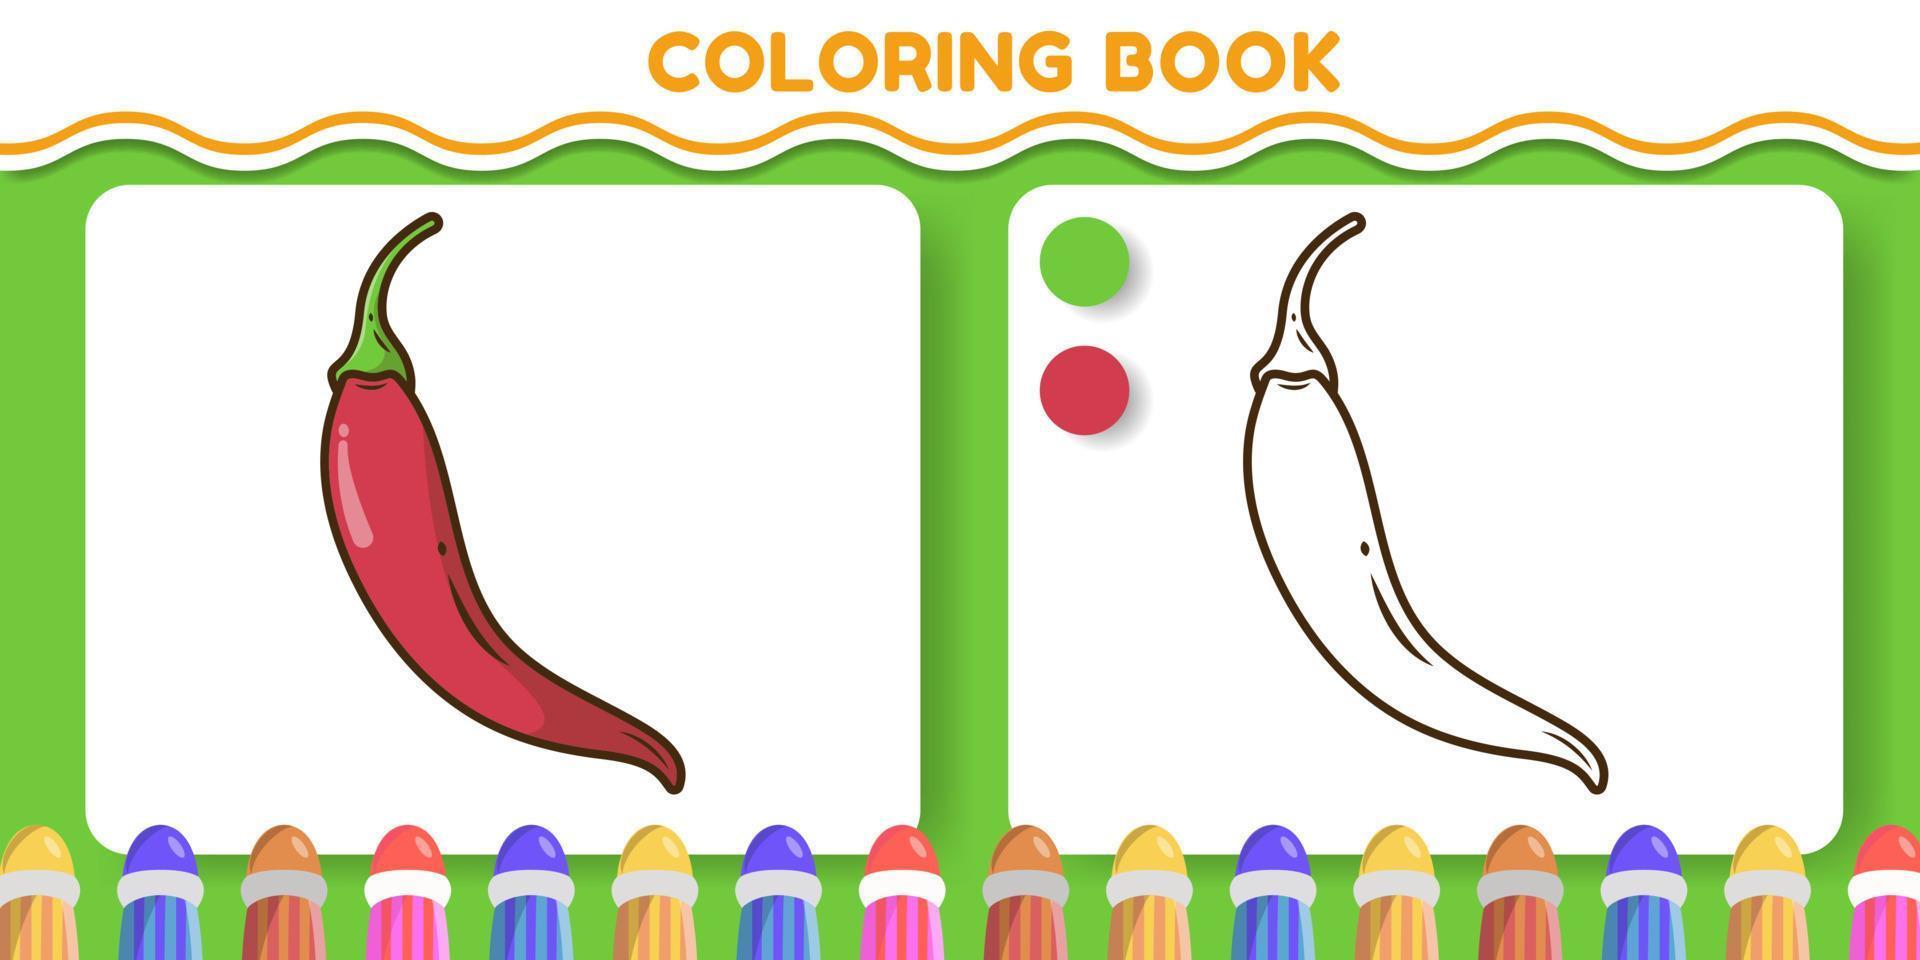 Colorful and black and white chilli hand drawn cartoon doodle coloring book for kids vector